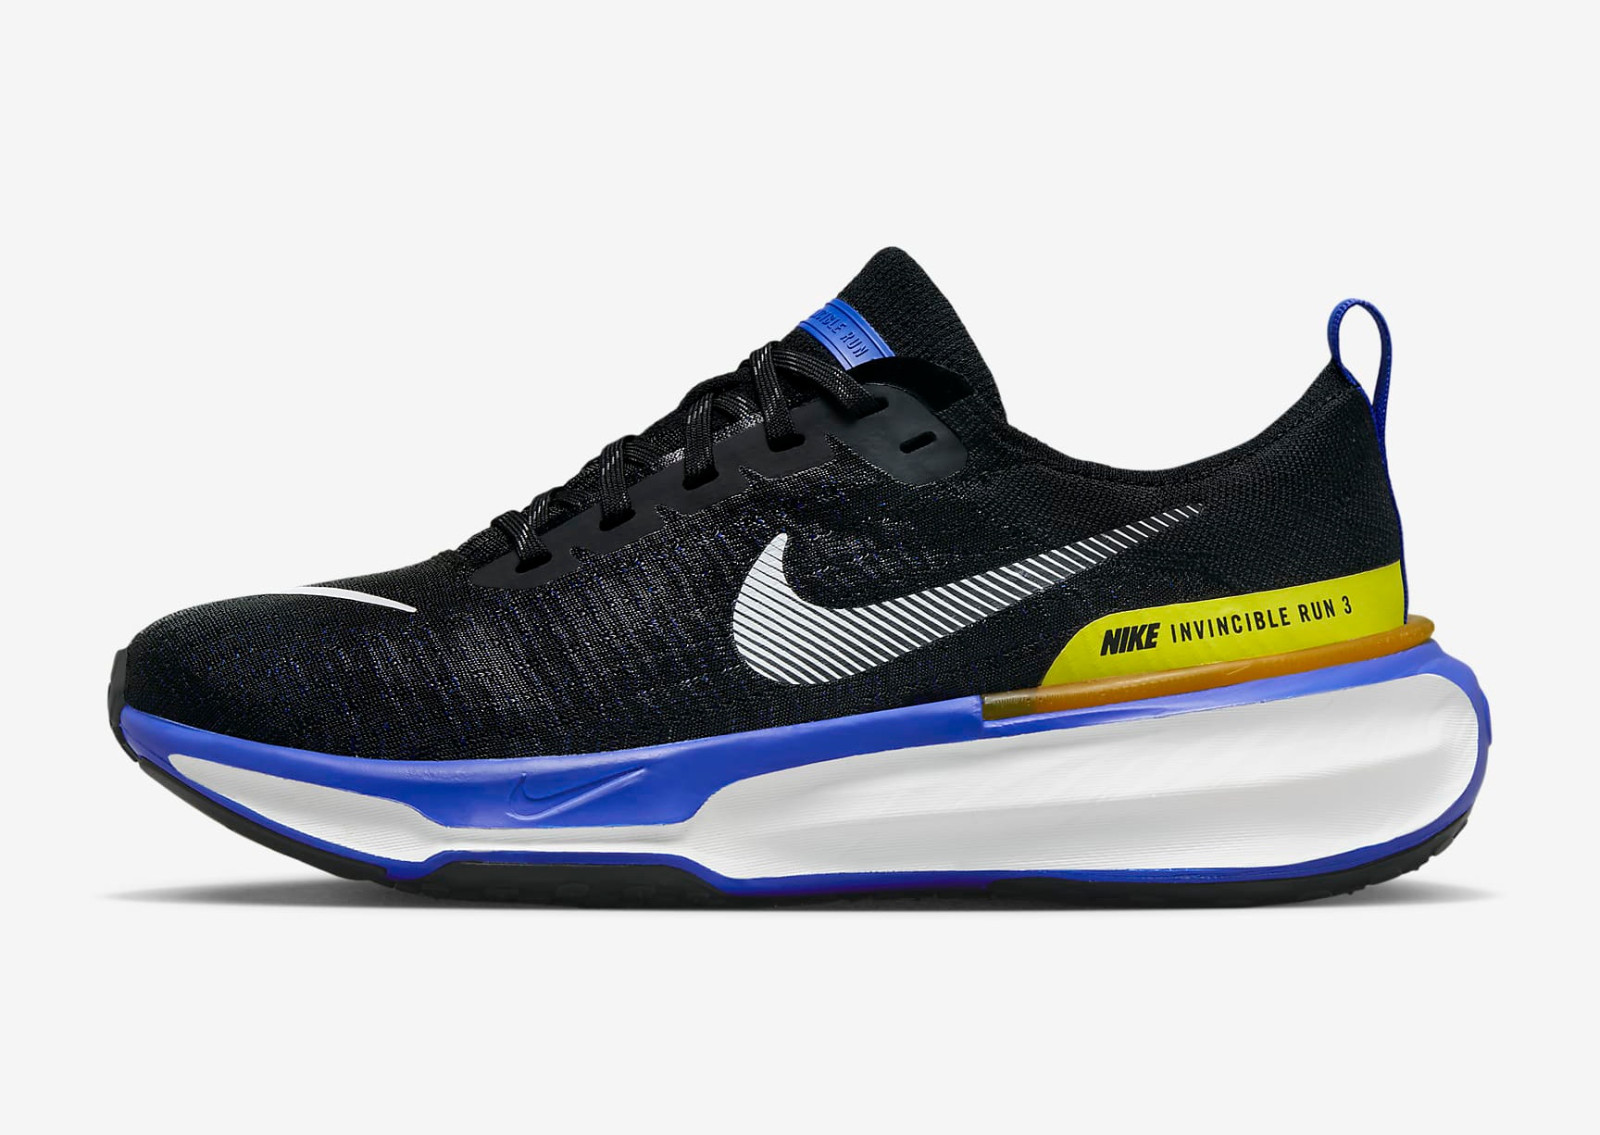 MultiscaleconsultingShops - ZoomX Invincible Run Flyknit 3 Black Racer Blue High Voltage DR2615 003 - air max fitsole 2 wotrue basketball schedule